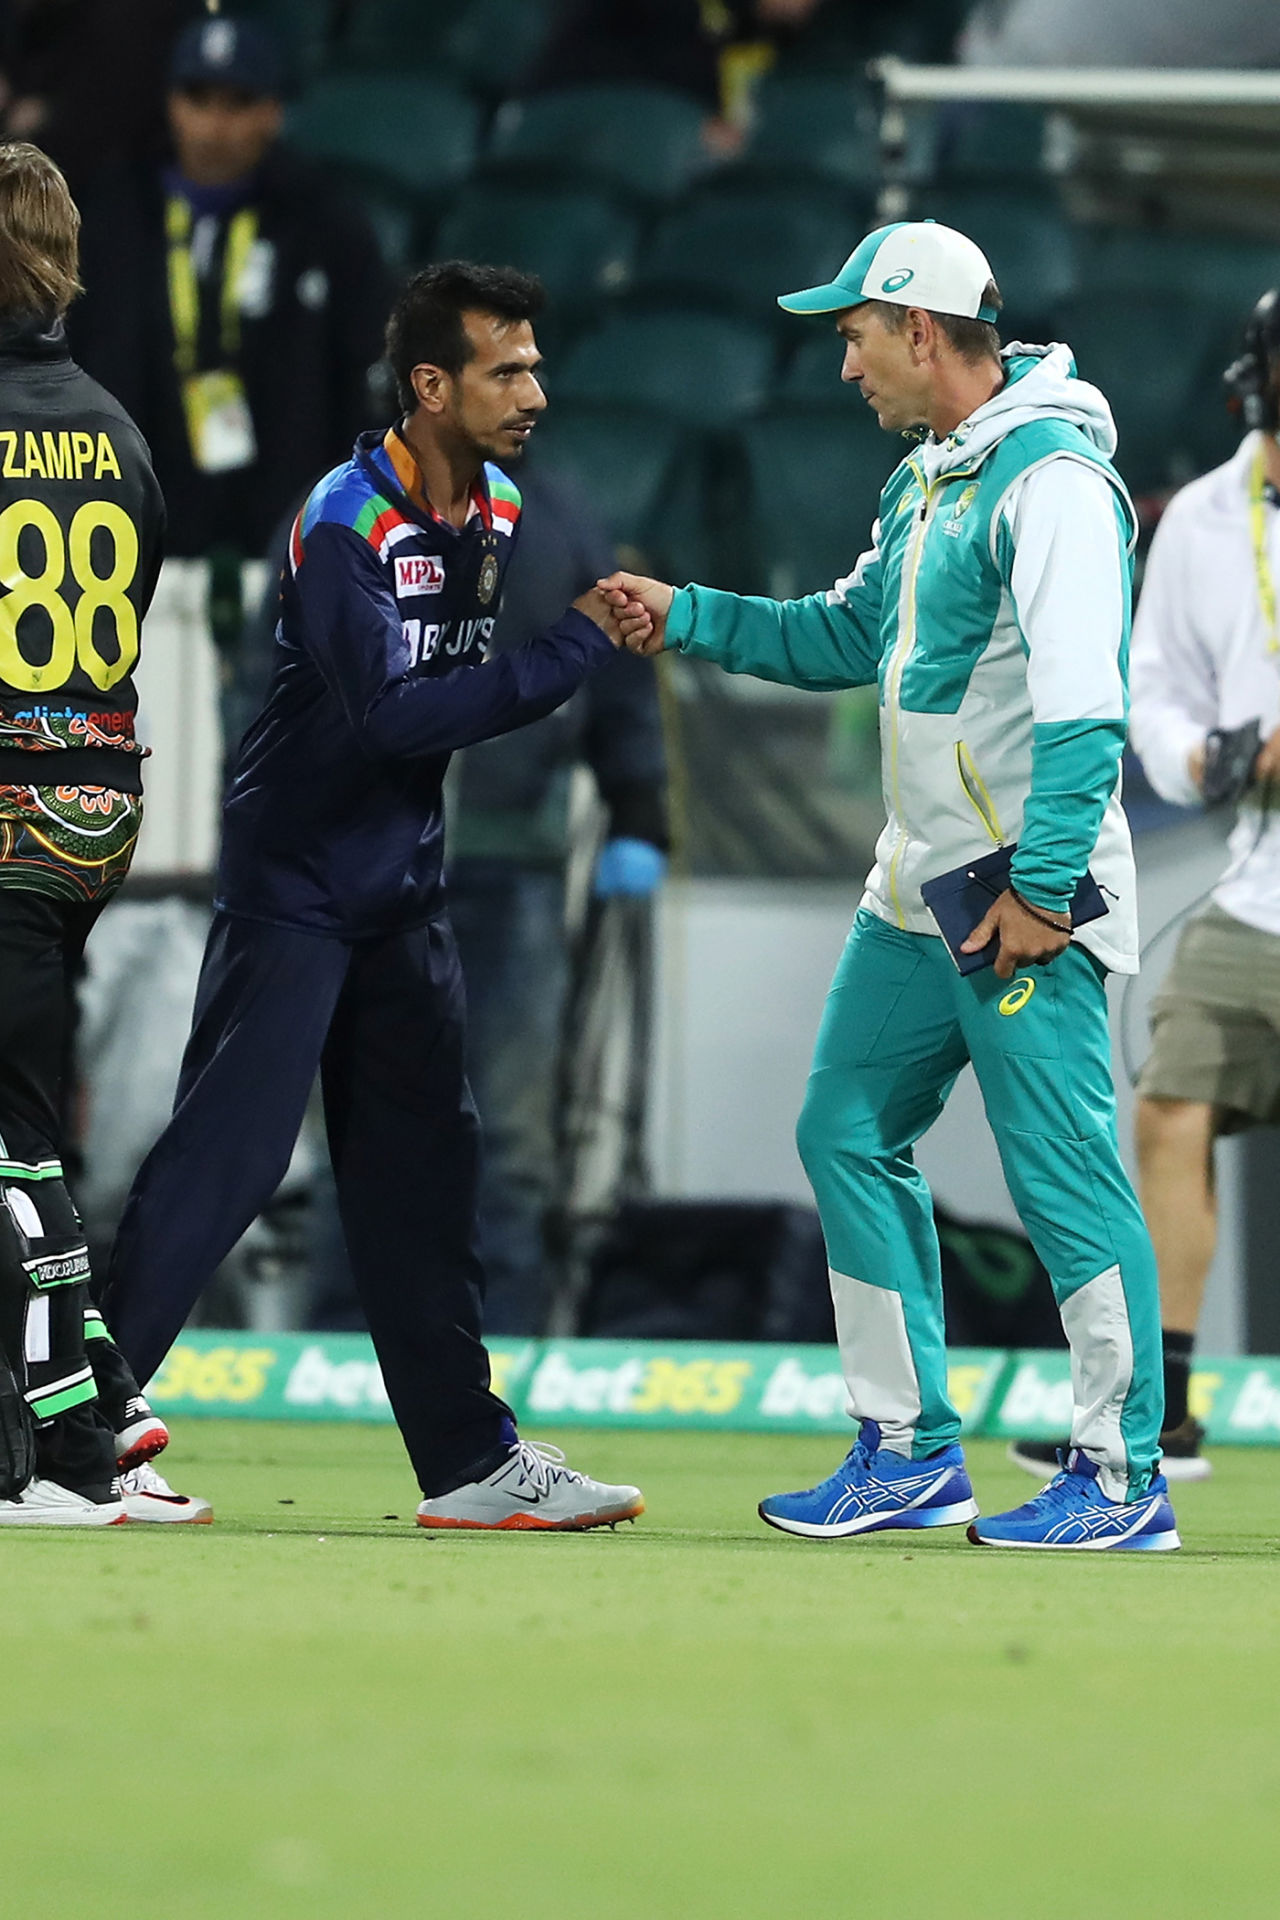 Justin Langer congratulates Yuzvendra Chahal, the concussion sub who won Player of the Match, Australia vs India, 1st T20I, Canberra, December 4, 2020